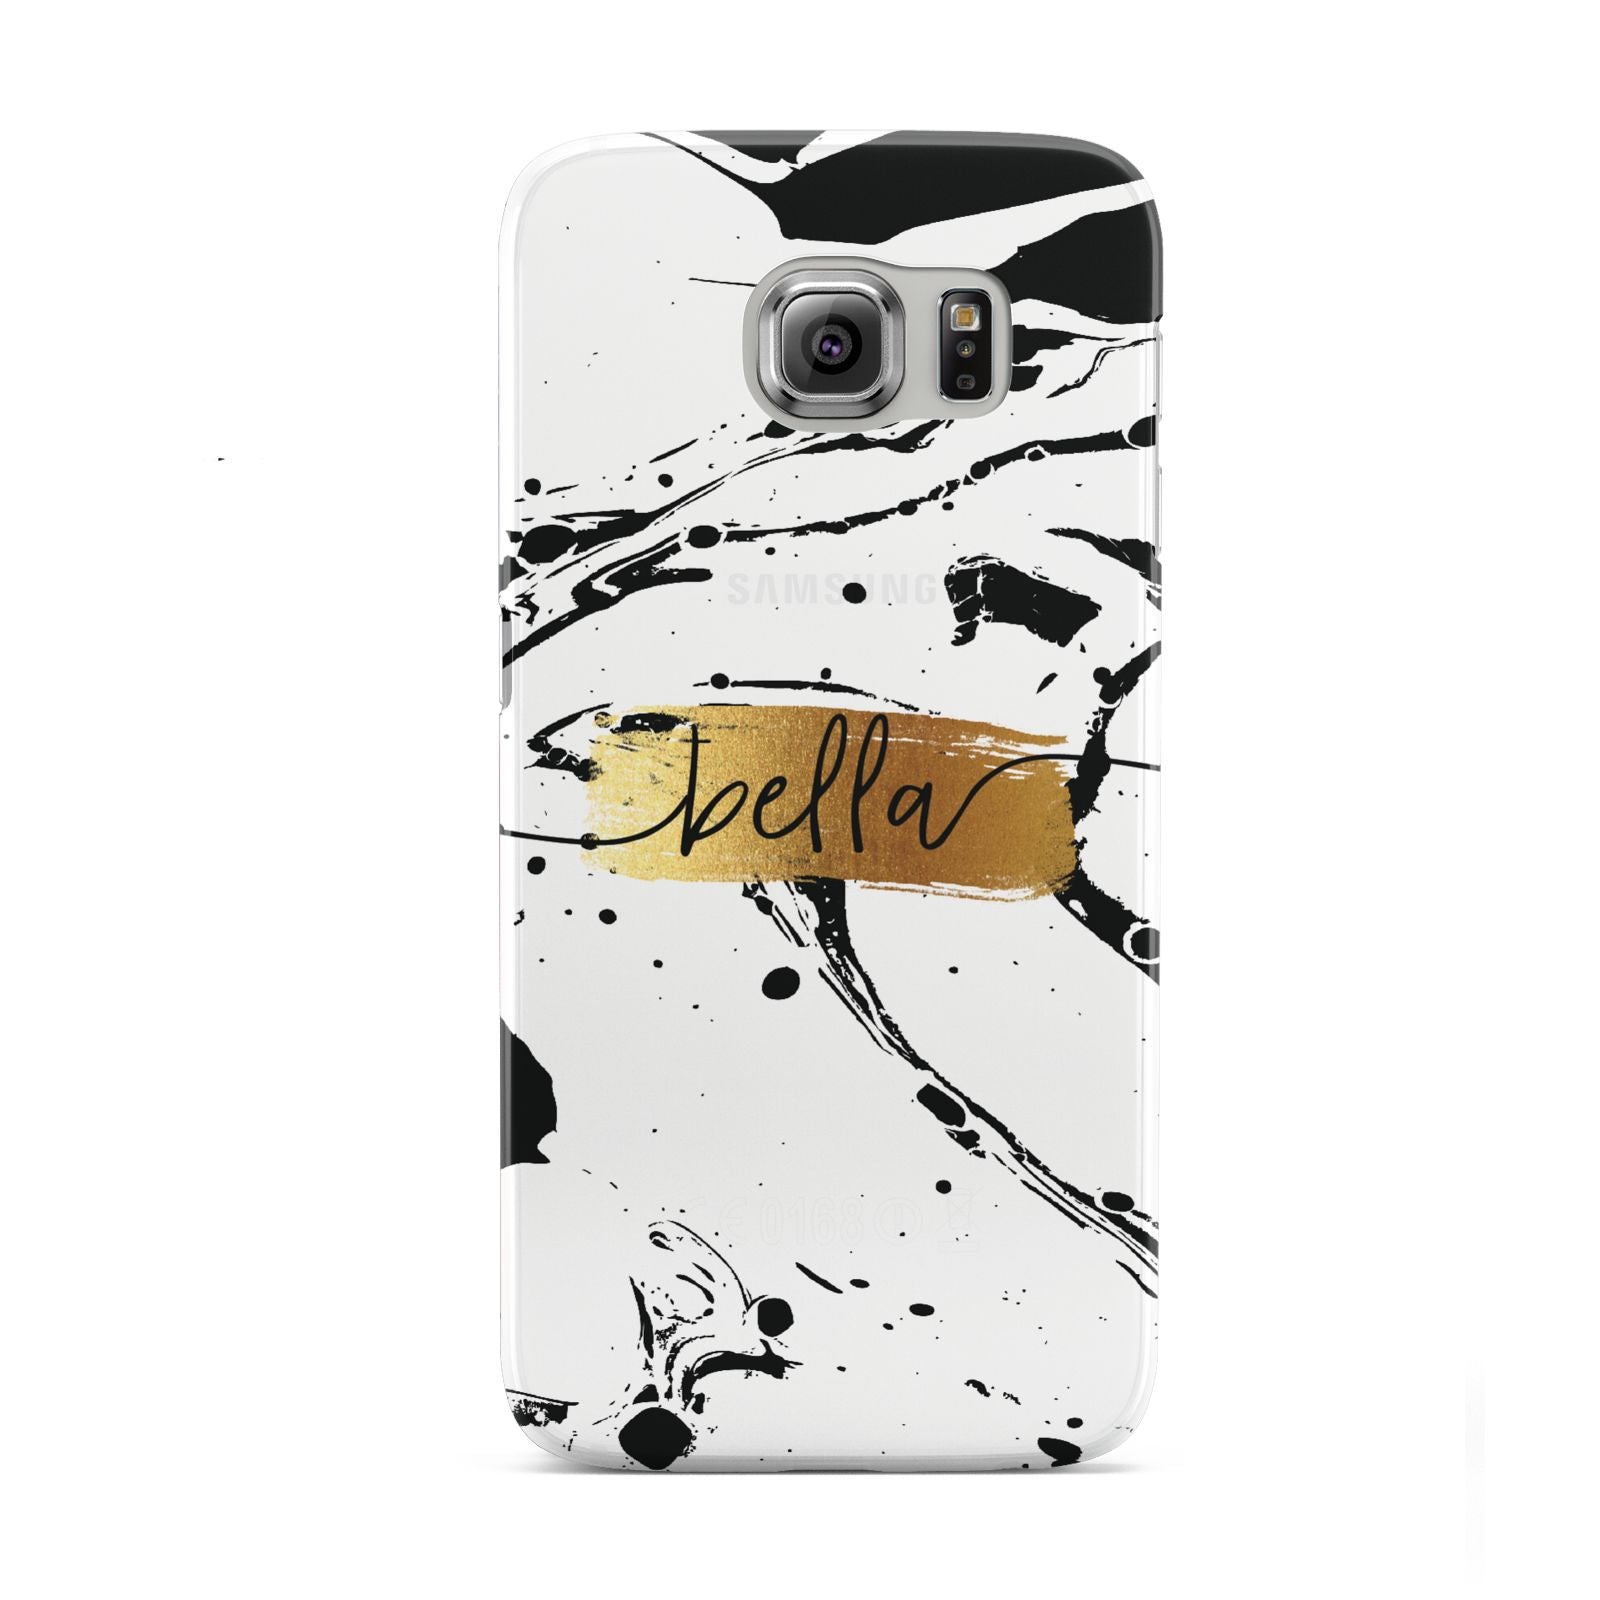 Personalised White Gold Swirl Marble Samsung Galaxy S6 Case